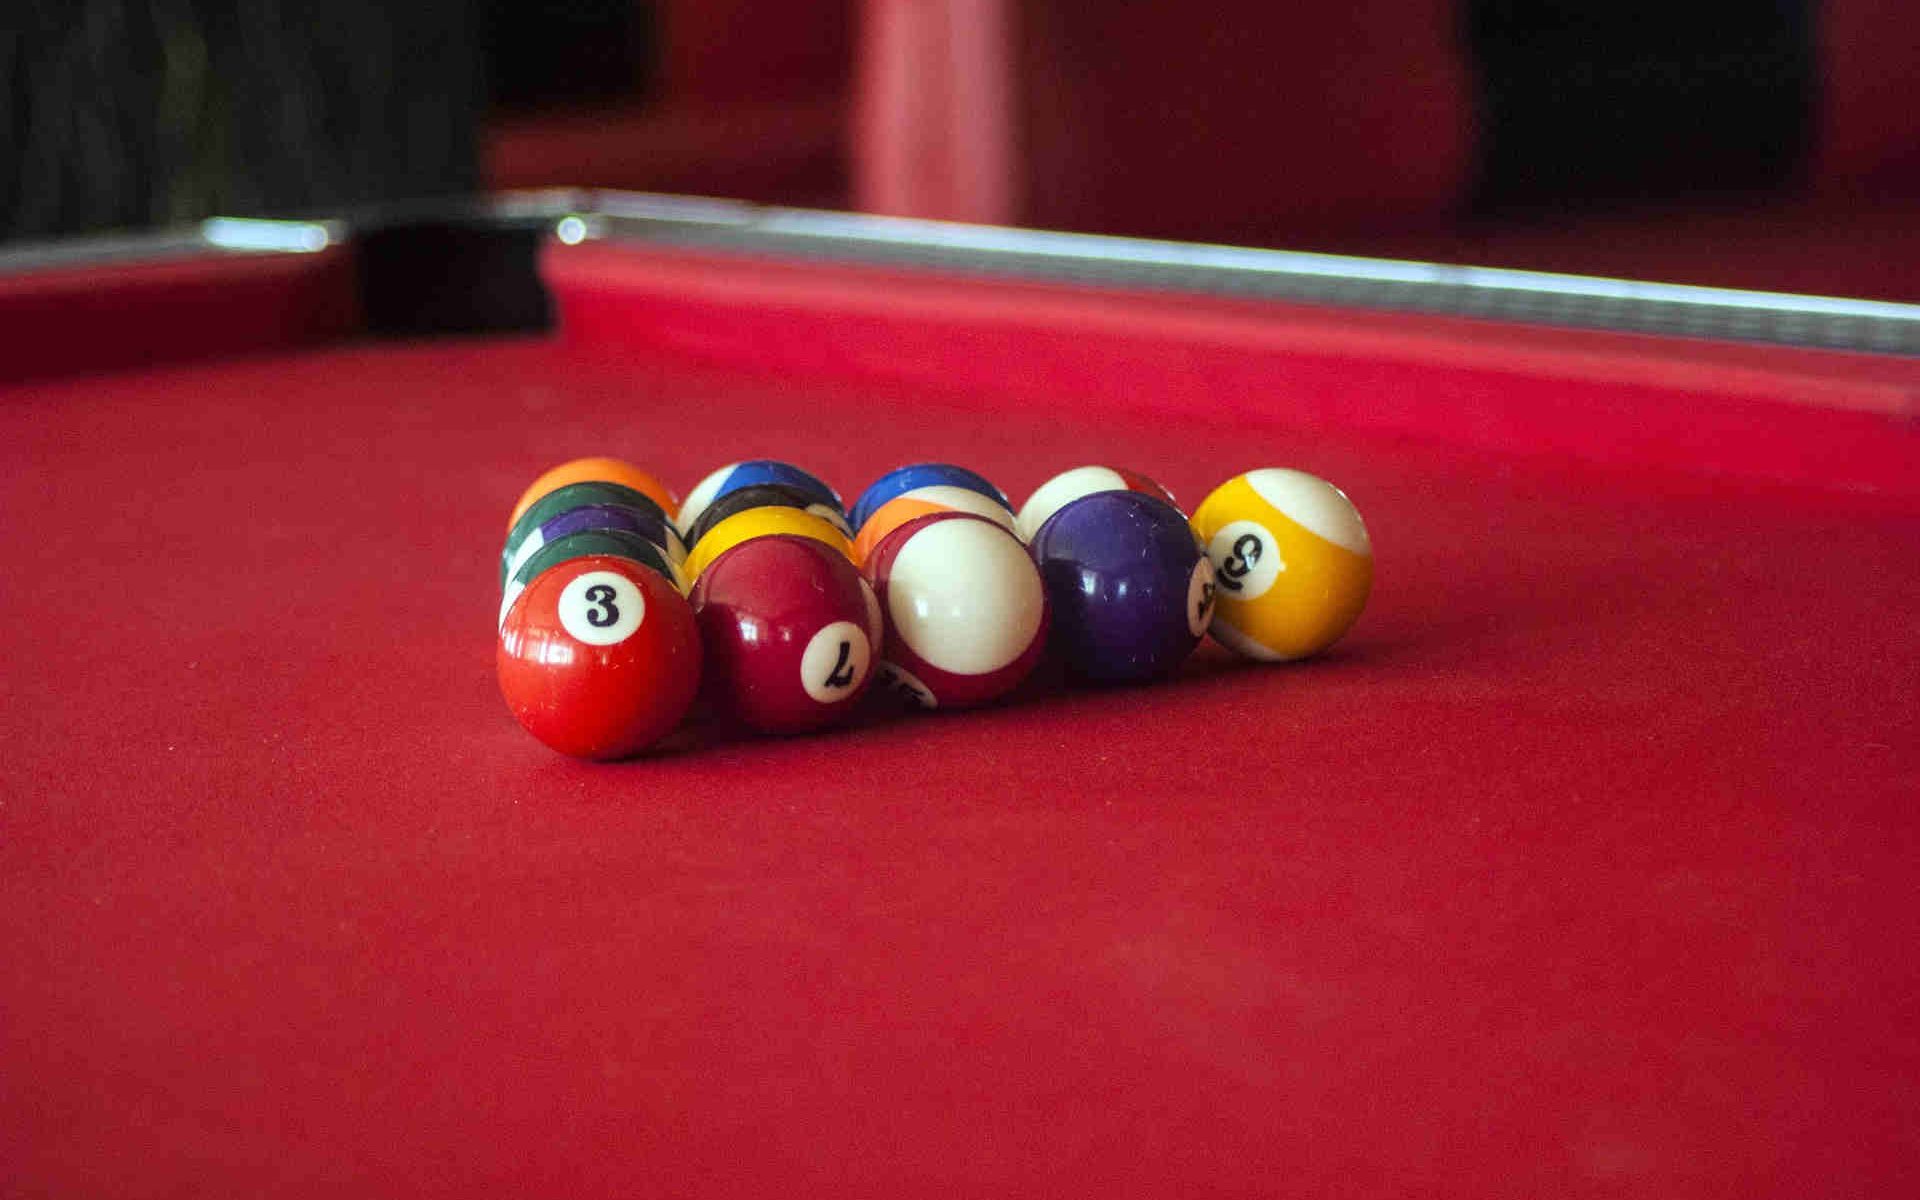 HOW TO REPLACE POOL TABLE FELT? 3/4